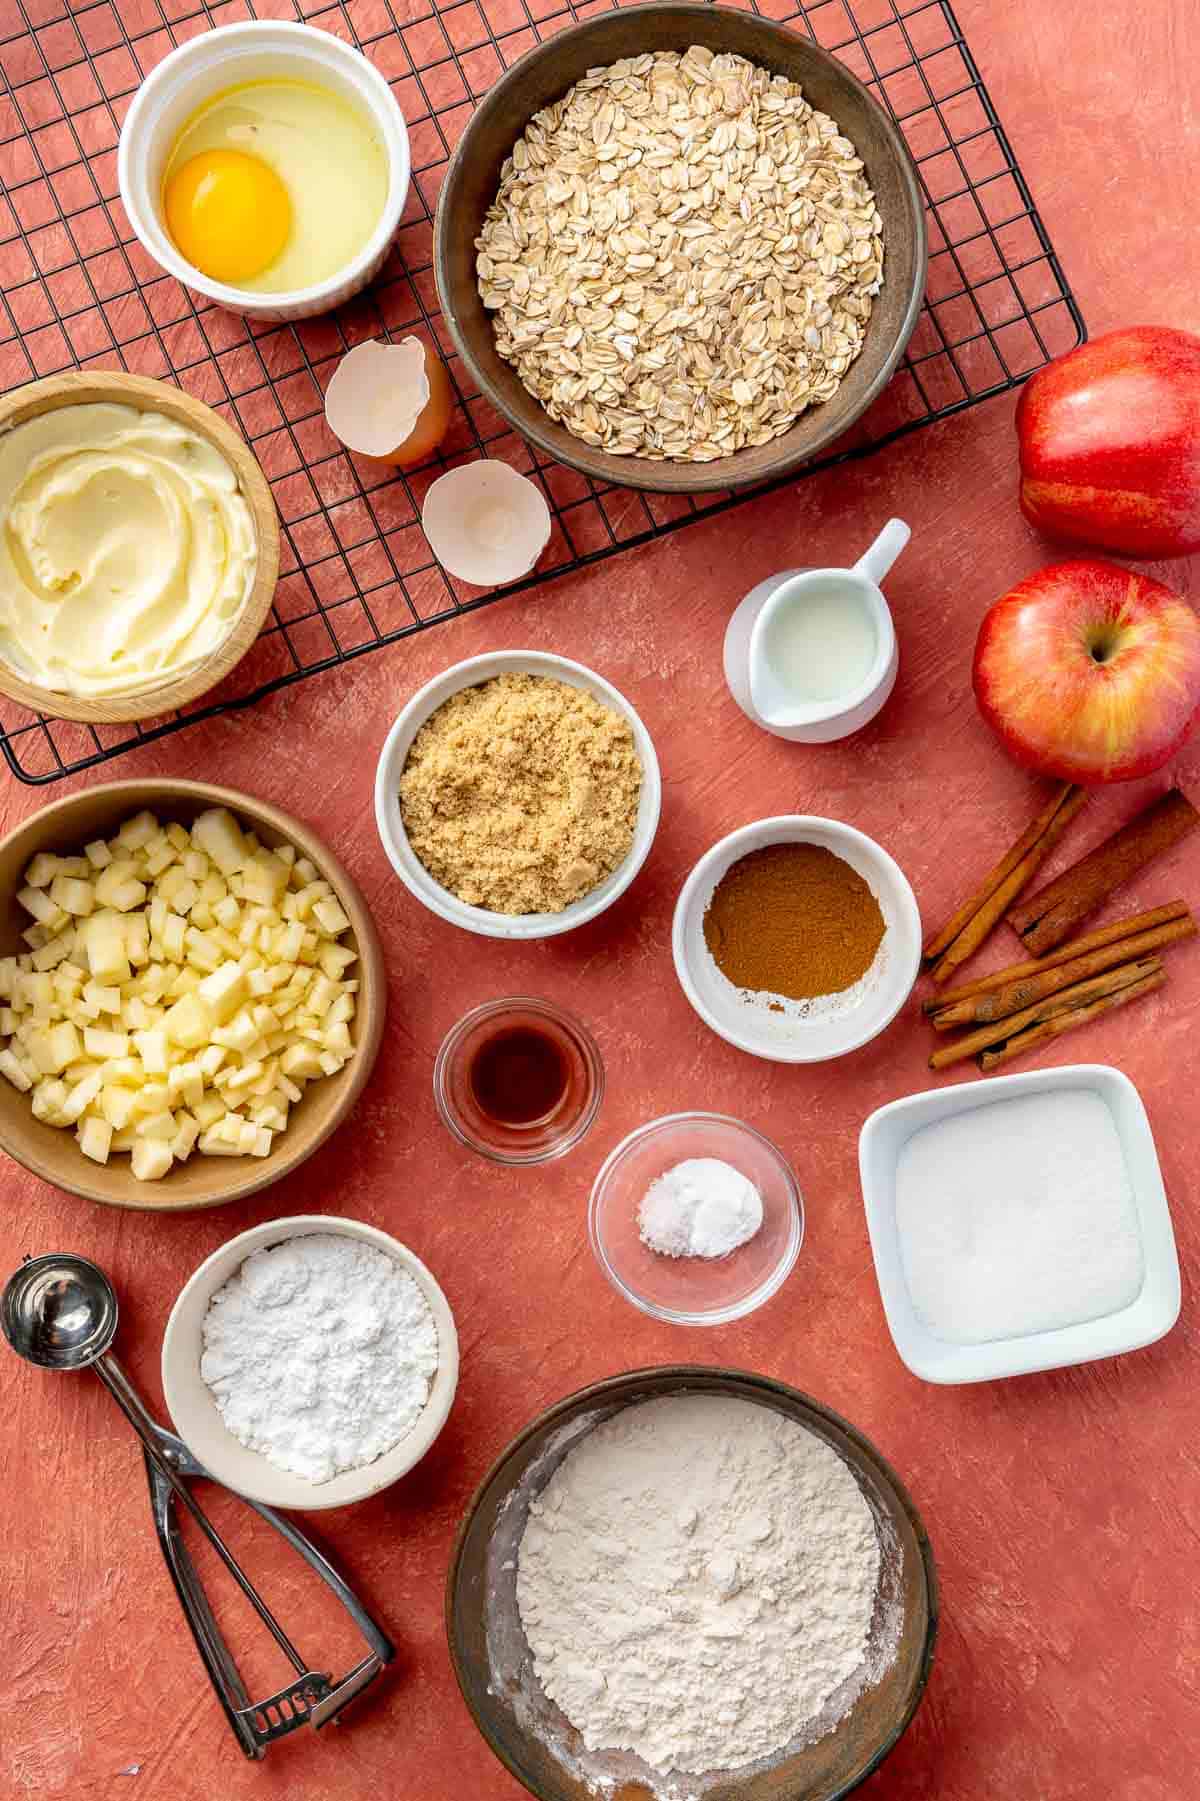 Oats, flour, diced apple, sugar, butter and spices divided into small bowls.